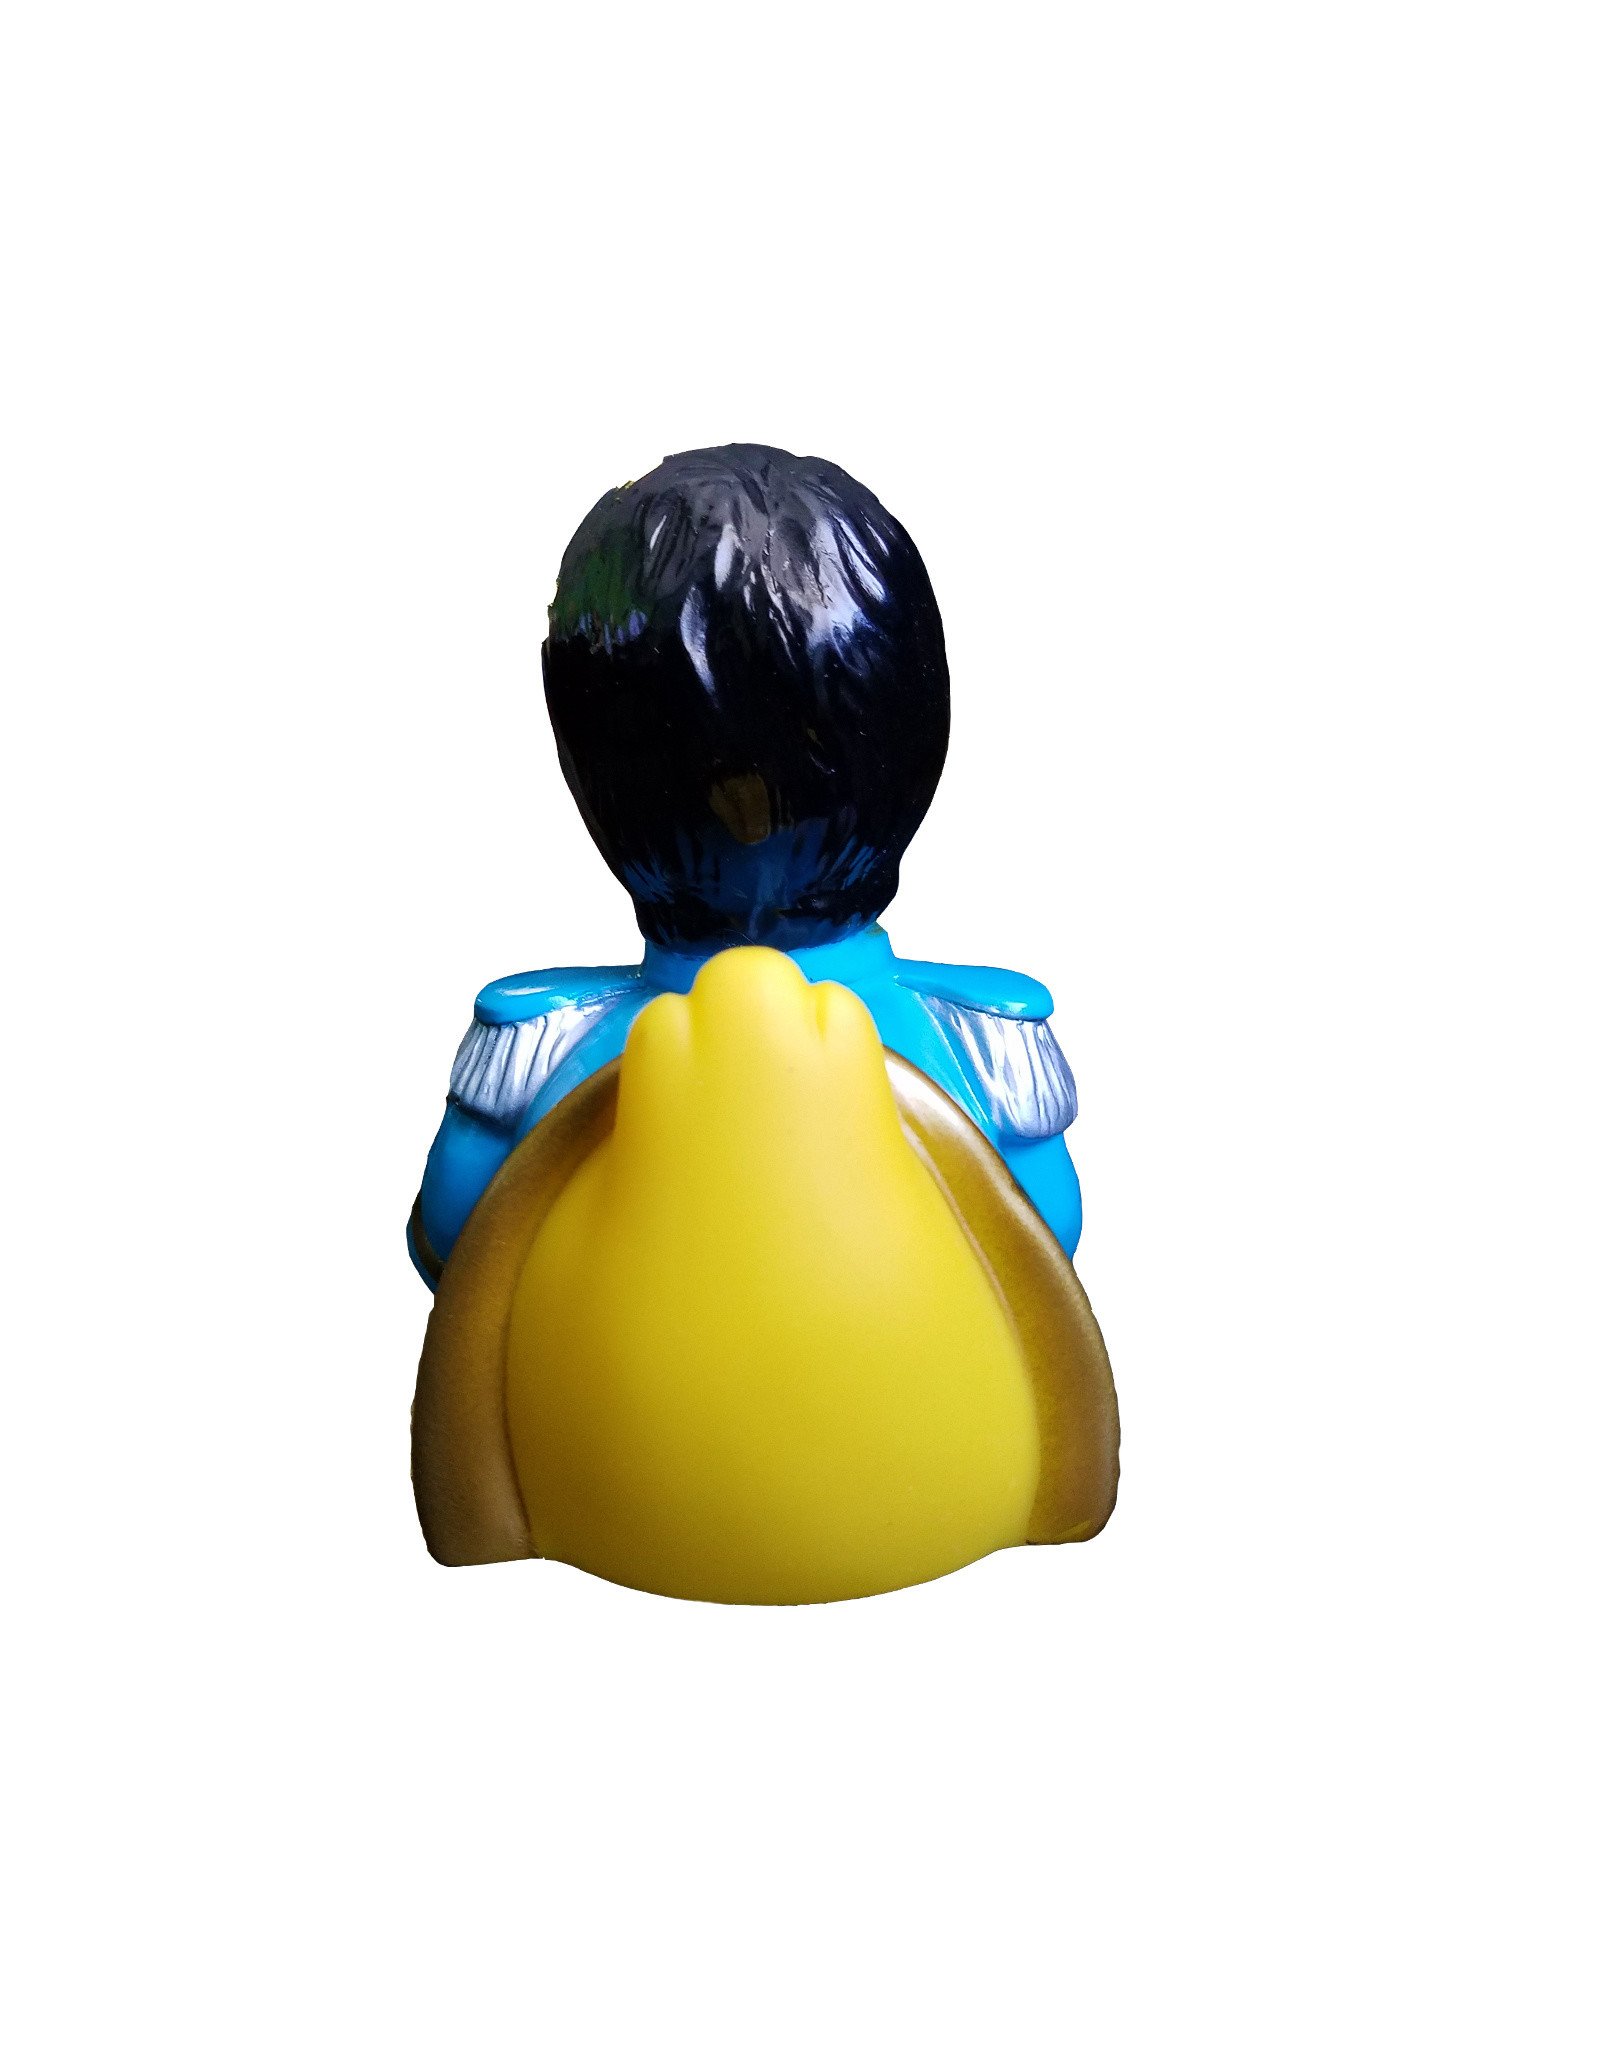 Sargeant Peepers Rubber Duck